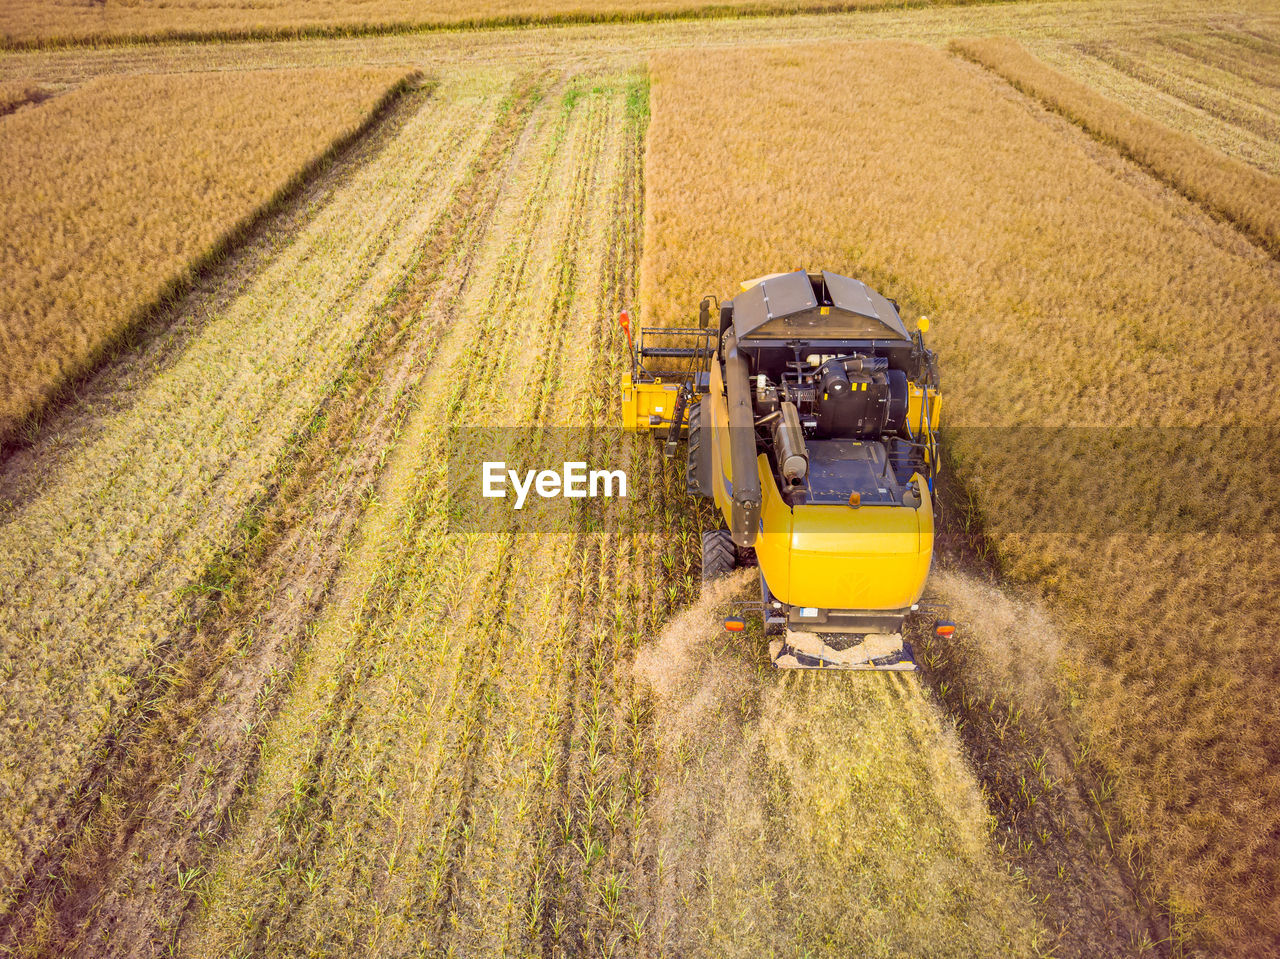 Combine harvester working on the large wheat field. aerial view of combine harvester.